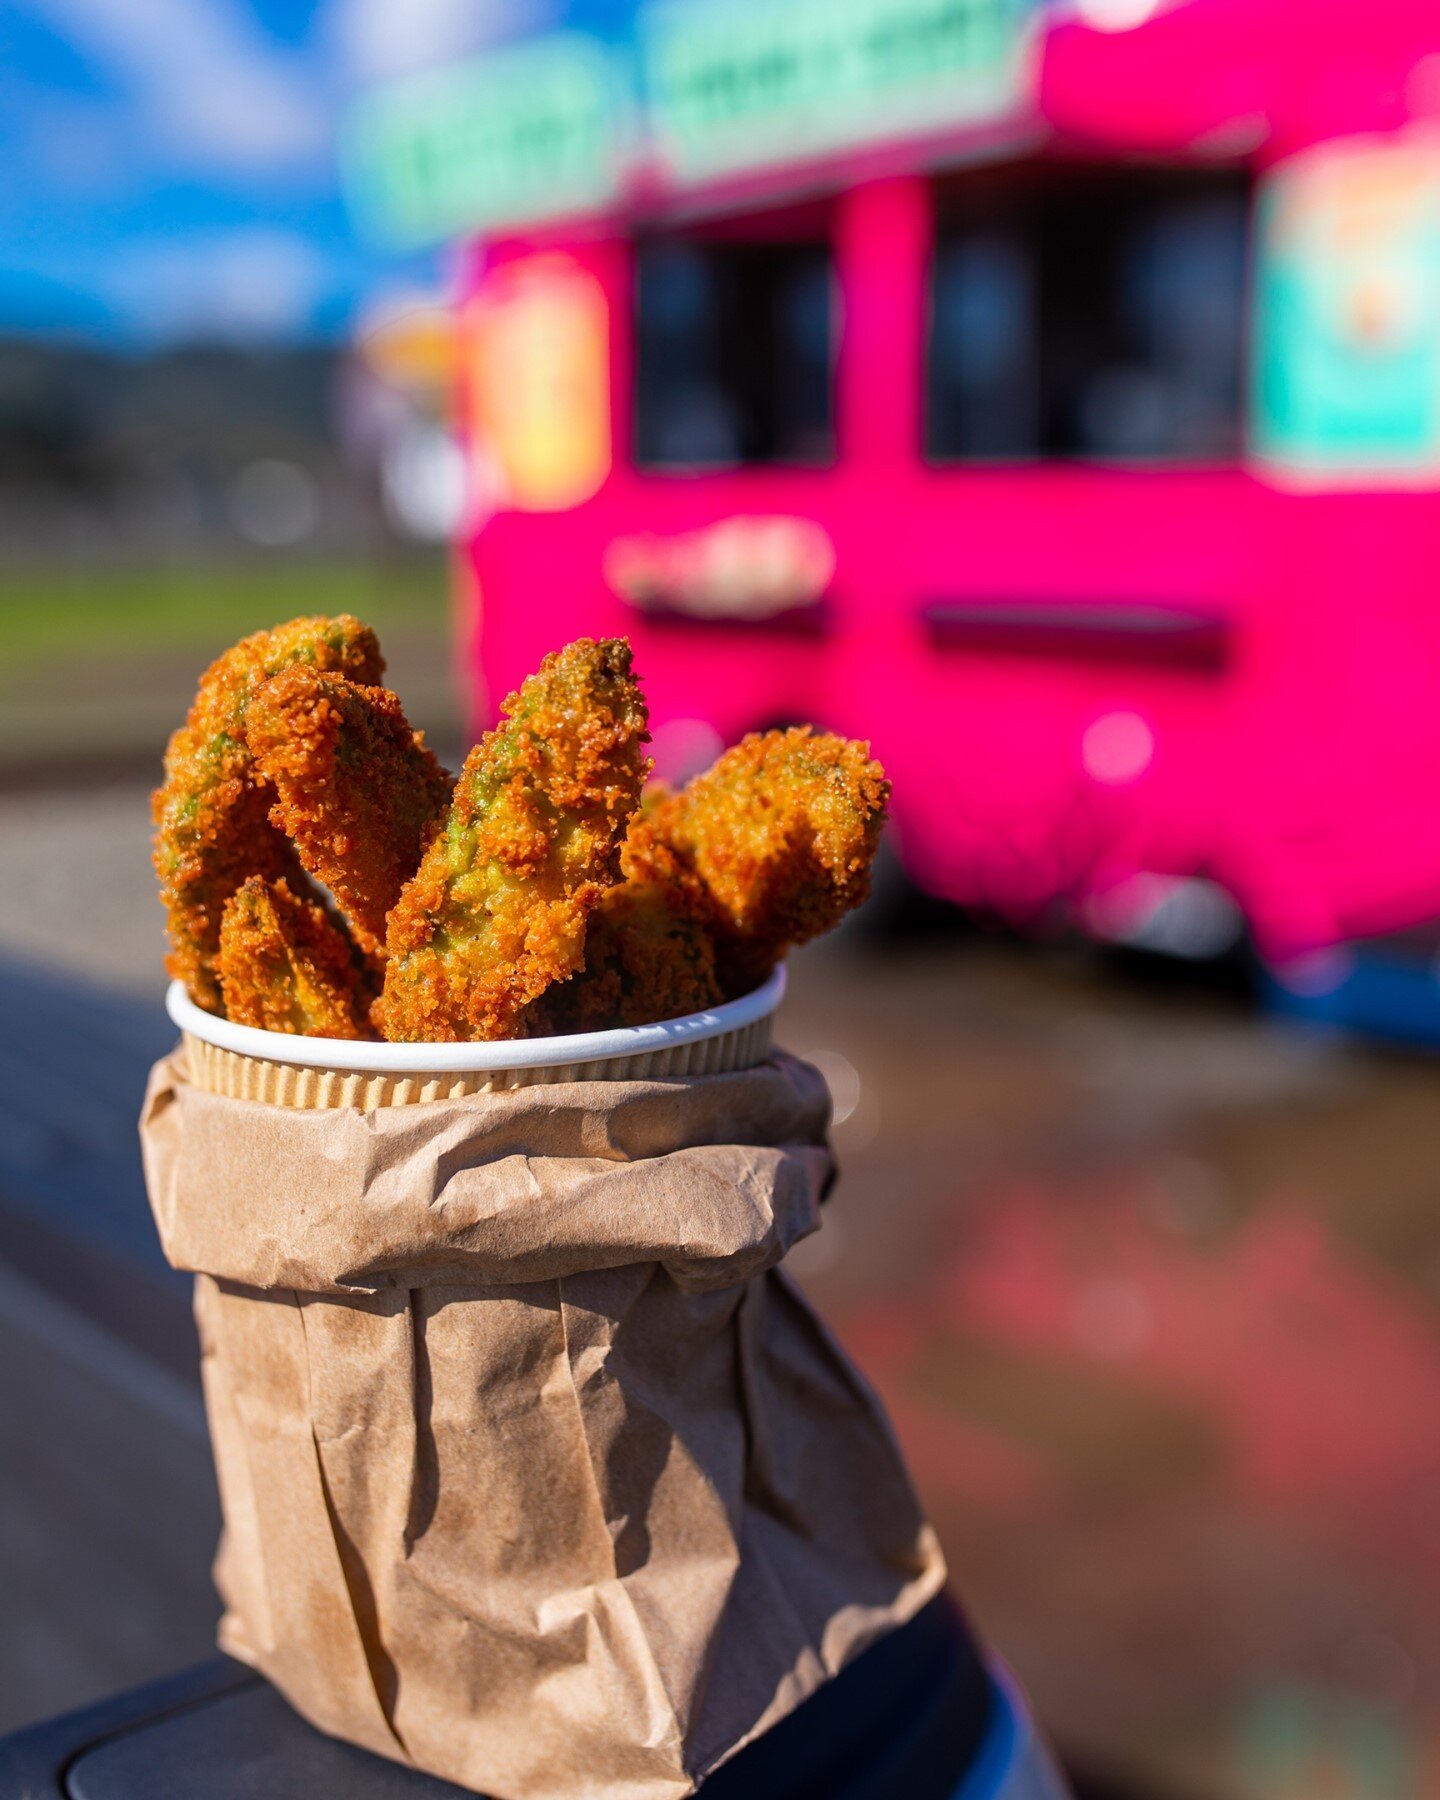 Crispy &amp; smooth.  Have you tried our Avocado Fries yet??⁠
⁠
🦄 See the #bestfoodtruckever menu, locations, or ask about catering at www.bestfoodtruckever.co (link in bio!)